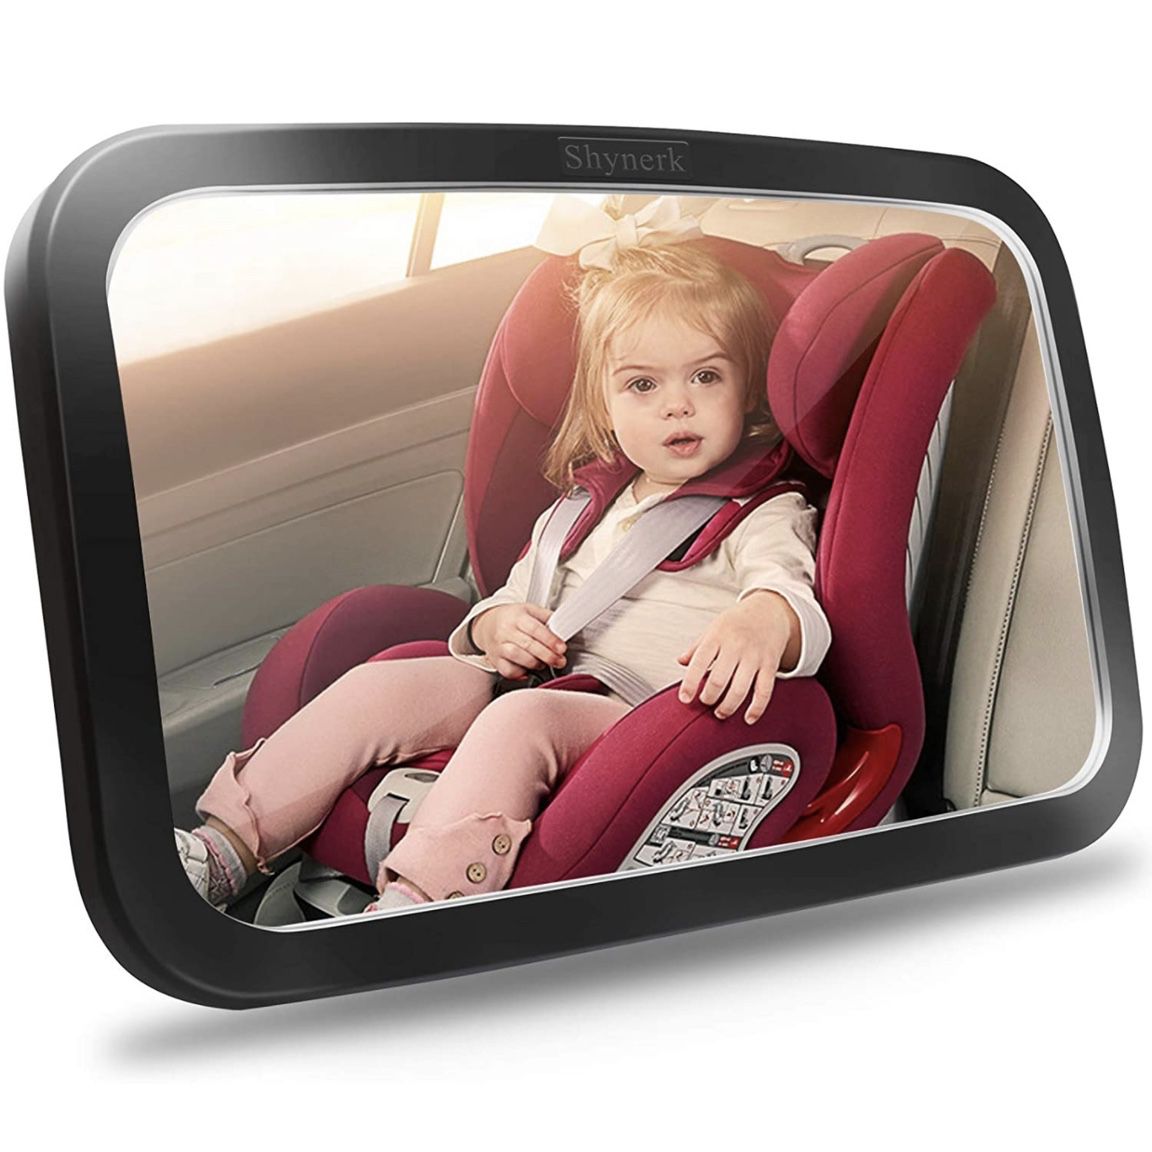 Shynerk Baby Car Mirror, Safety Car Seat Mirror for Rear Facing Infant with Wide Crystal Clear View, Shatterproof, Fully Adjustable